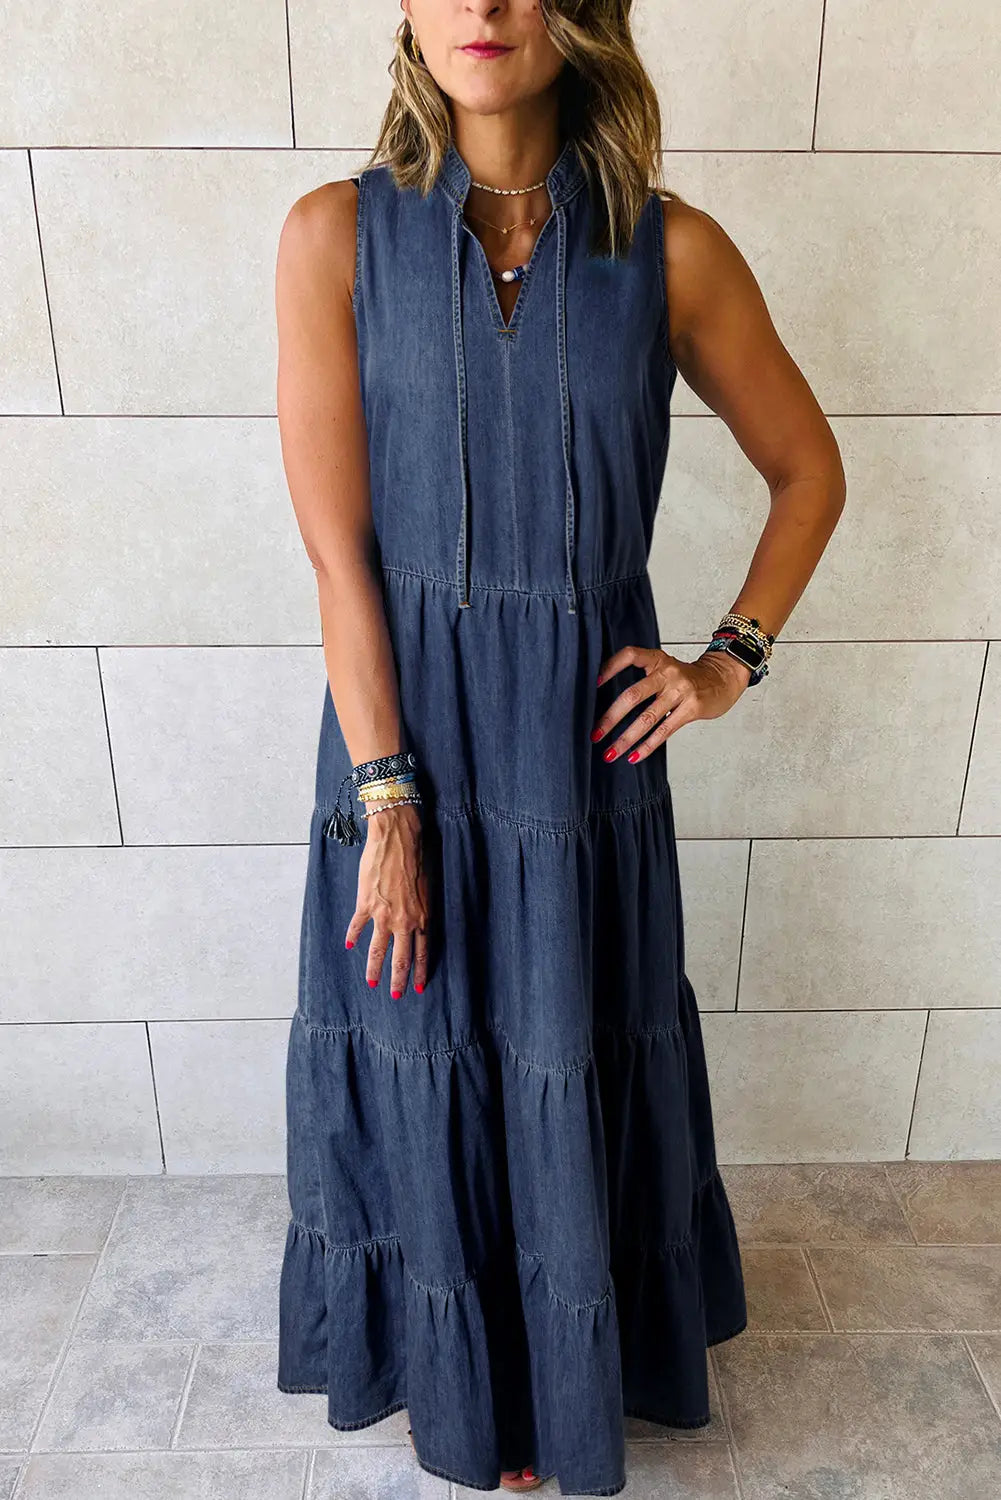 Real teal sleeveless tiered chambray maxi dress - s / 95% cotton + 5% polyester - dresses/maxi dresses